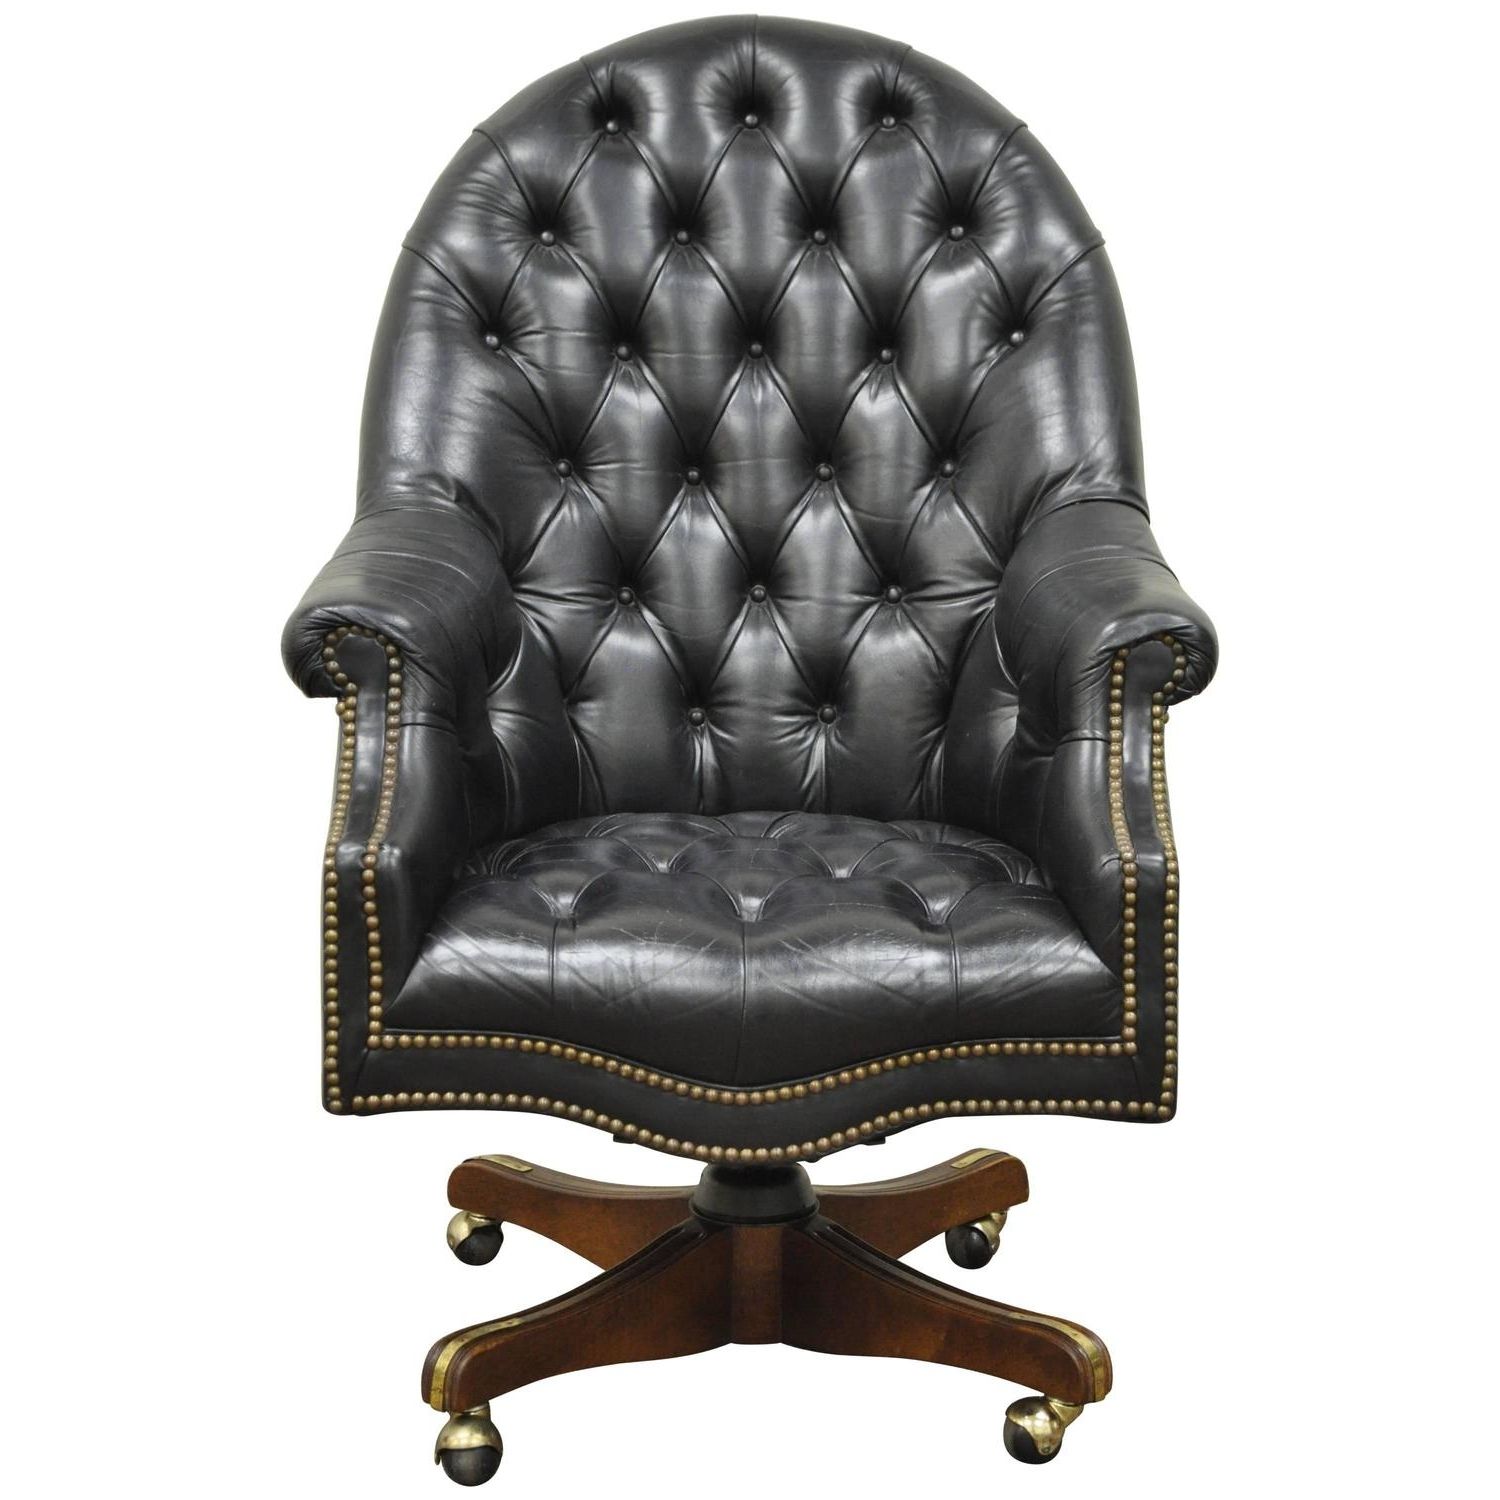 Vintage Deep Tufted Black Leather English Chesterfield Style Pertaining To Well Known Nailhead Executive Office Chairs (View 12 of 20)